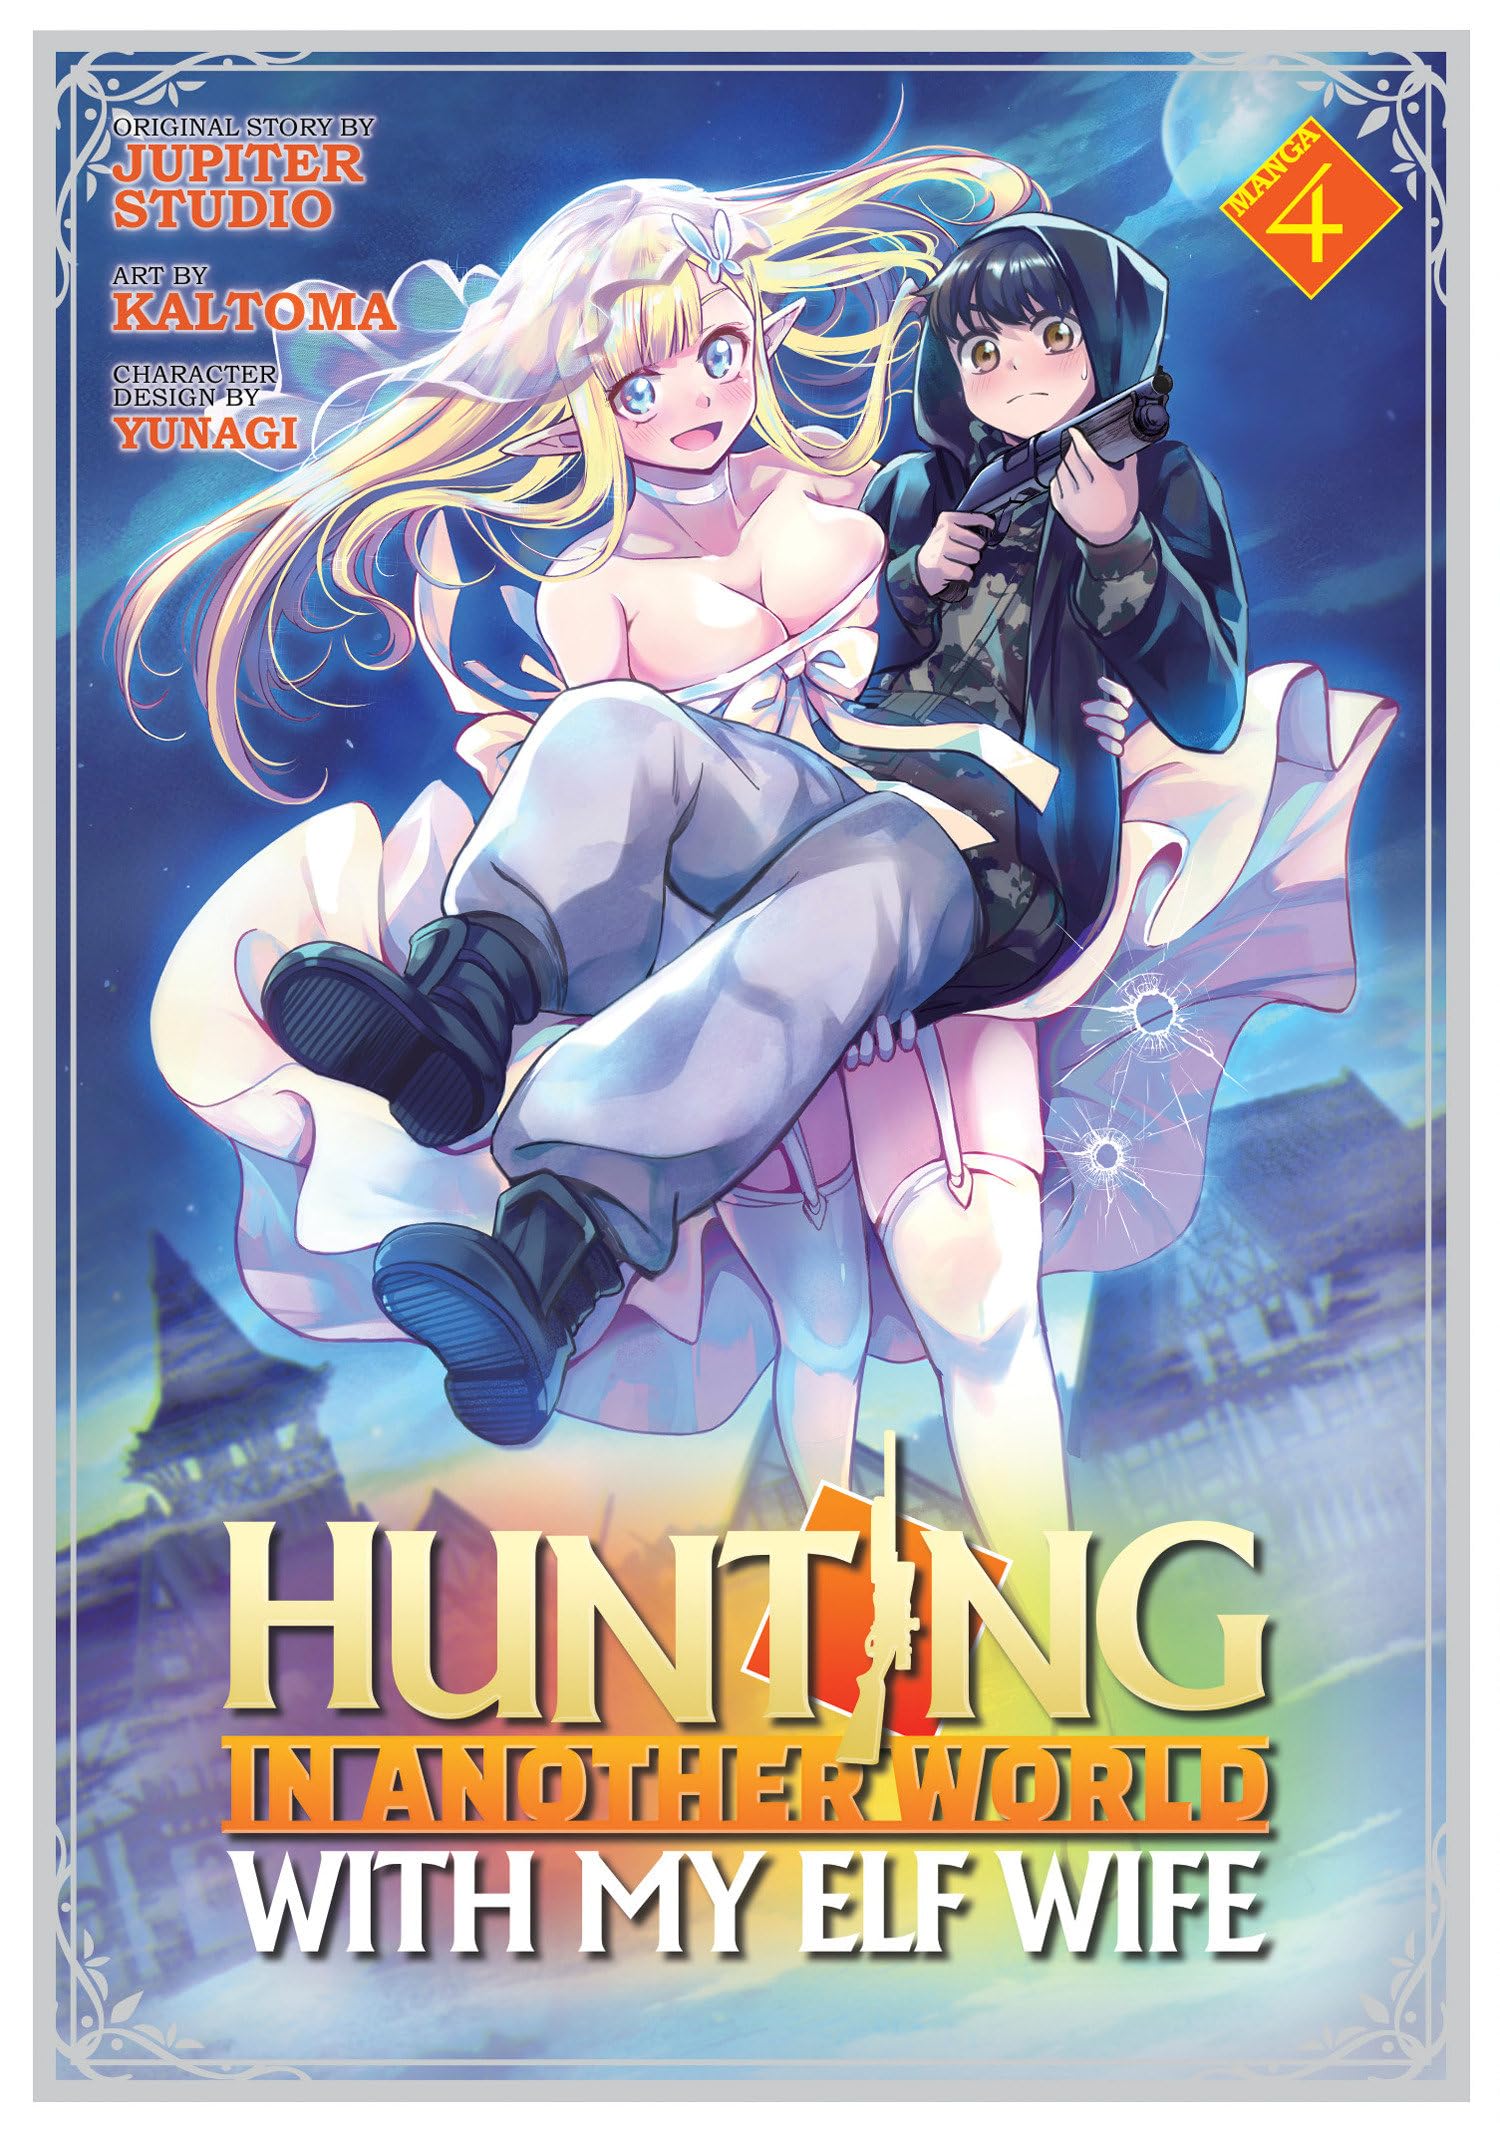 Hunting in Another World with My Elf Wife (Manga) Vol. 04